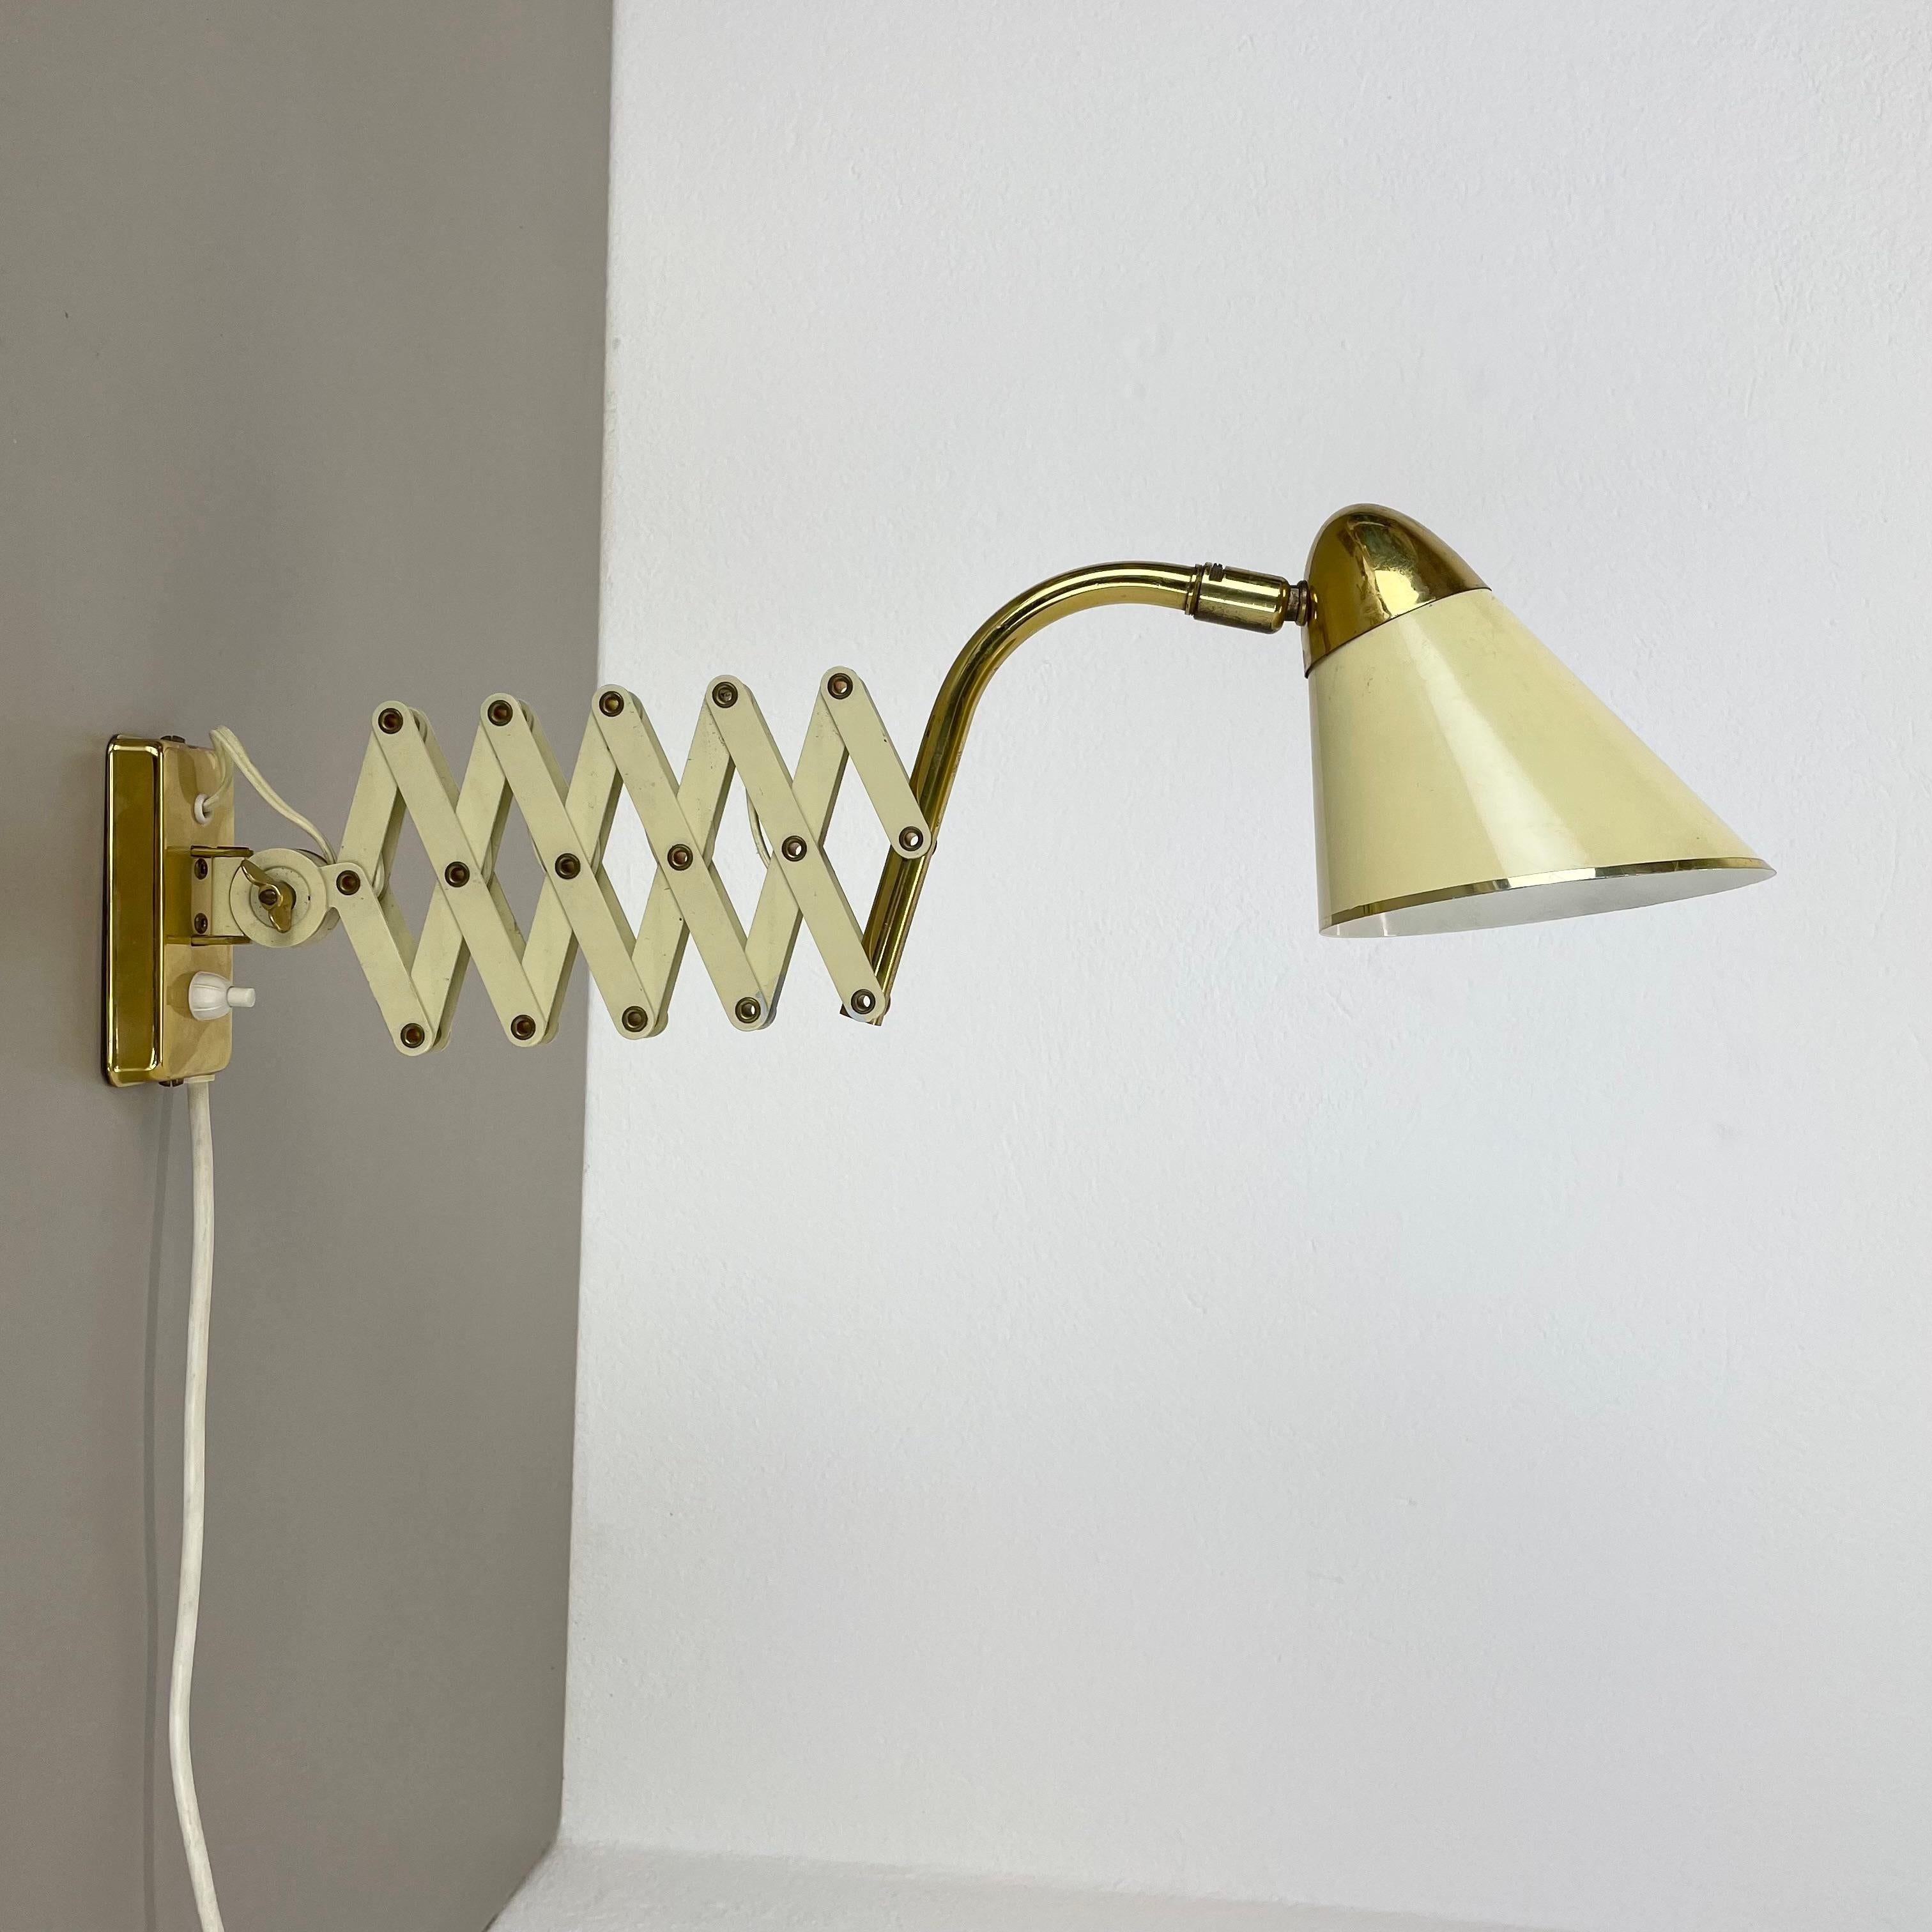 Article:

scissors wall light

Karl Lang, 1950s



Producer:

SIS Leuchten, Germany


Age:

1950s



Description:

This super rare wall light was designed by Karl Lang in the 1950s and produced by the company SIS Leuchten in Germany in the 1950s.